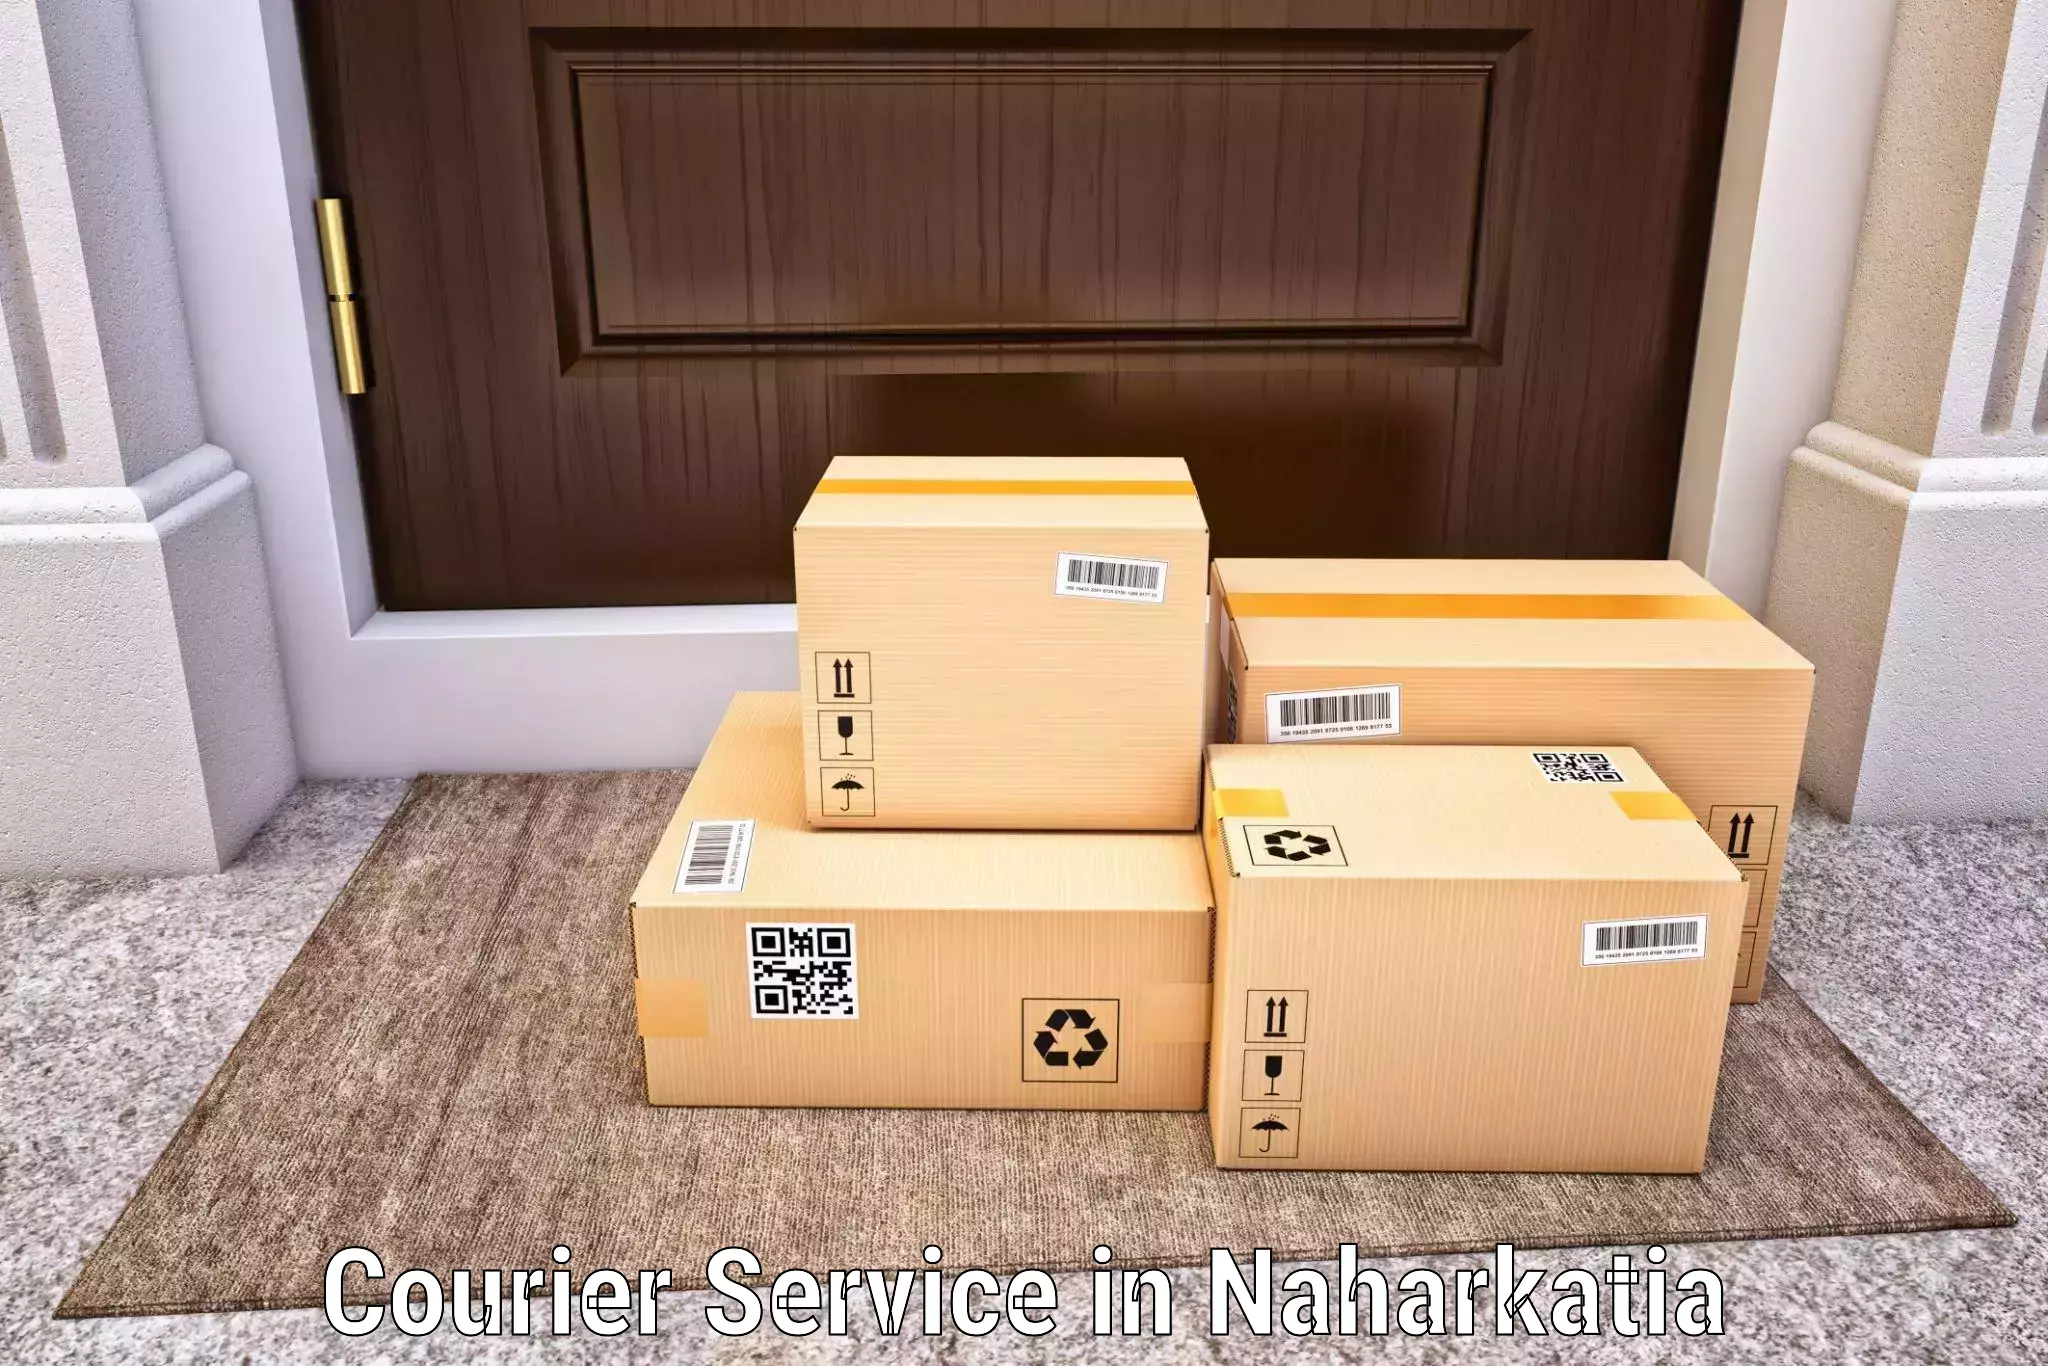 24-hour courier services in Naharkatia